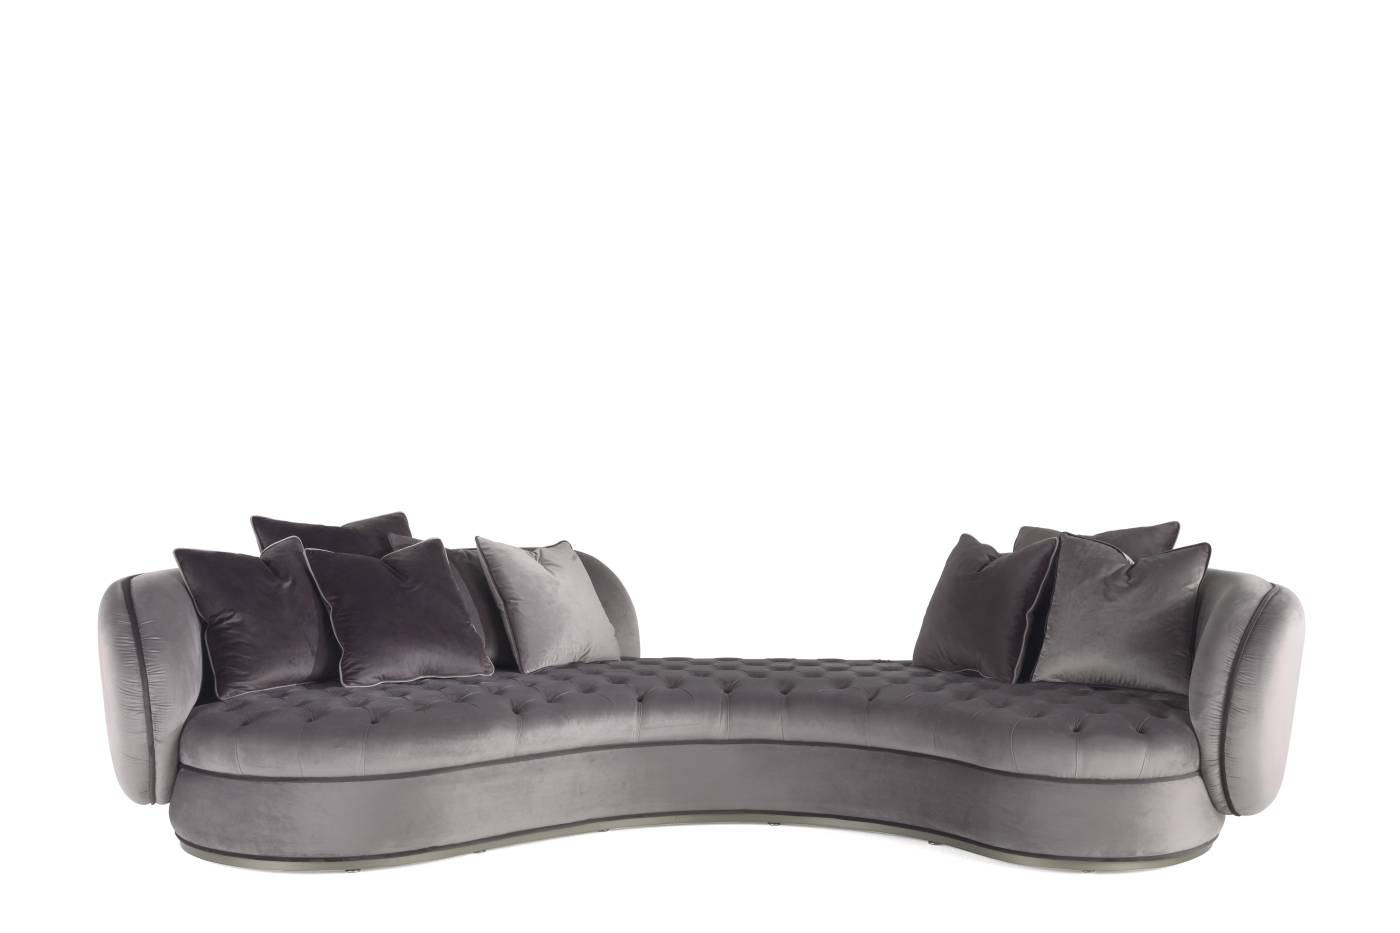 TOKYO 3-seater sofa - Bespoke projects with luxury Made in Italy classic furniture